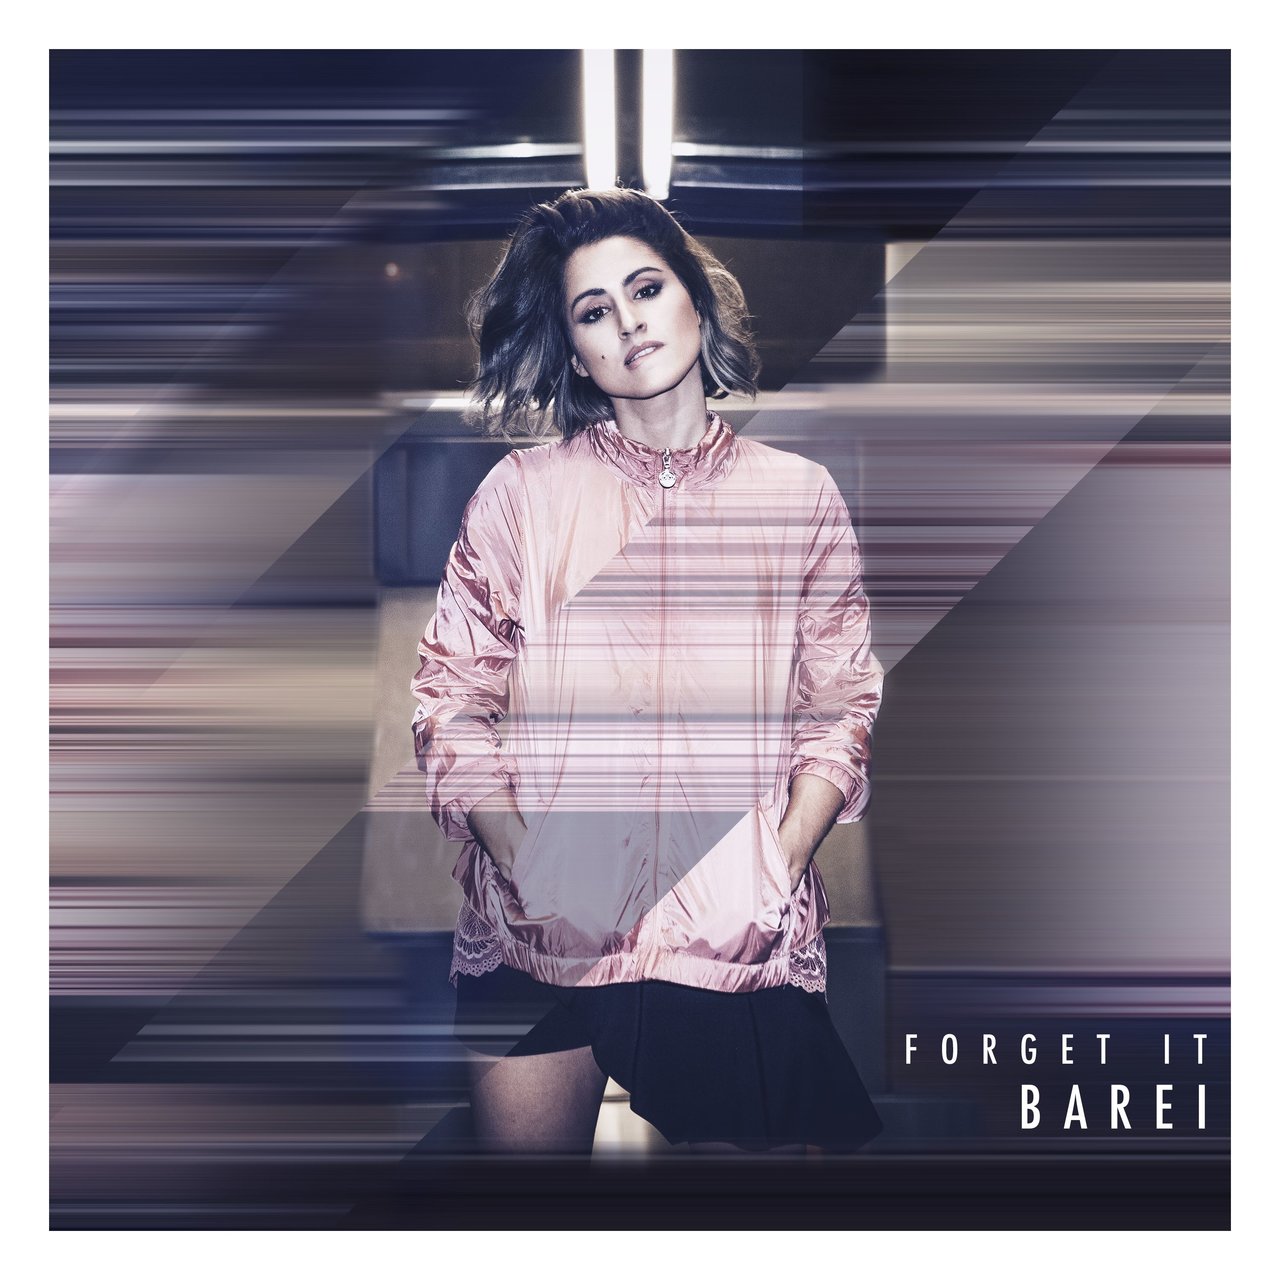 Barei — Forget It cover artwork